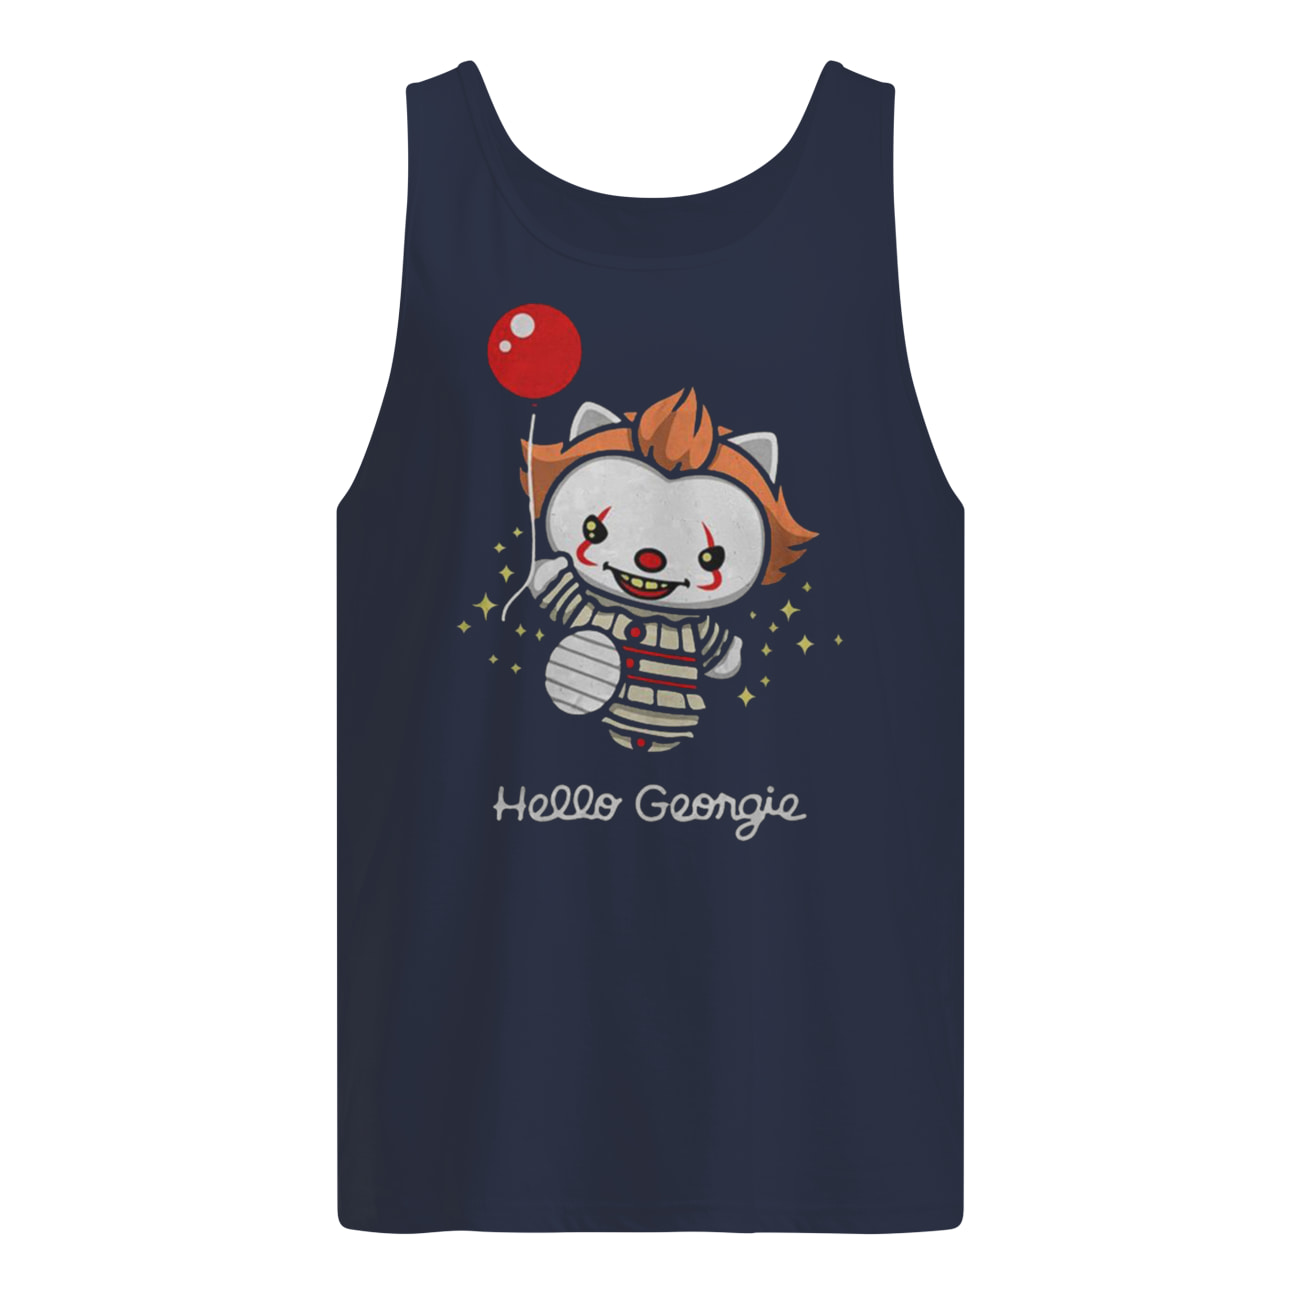 Pennywise kitty cat hello georgie tank top